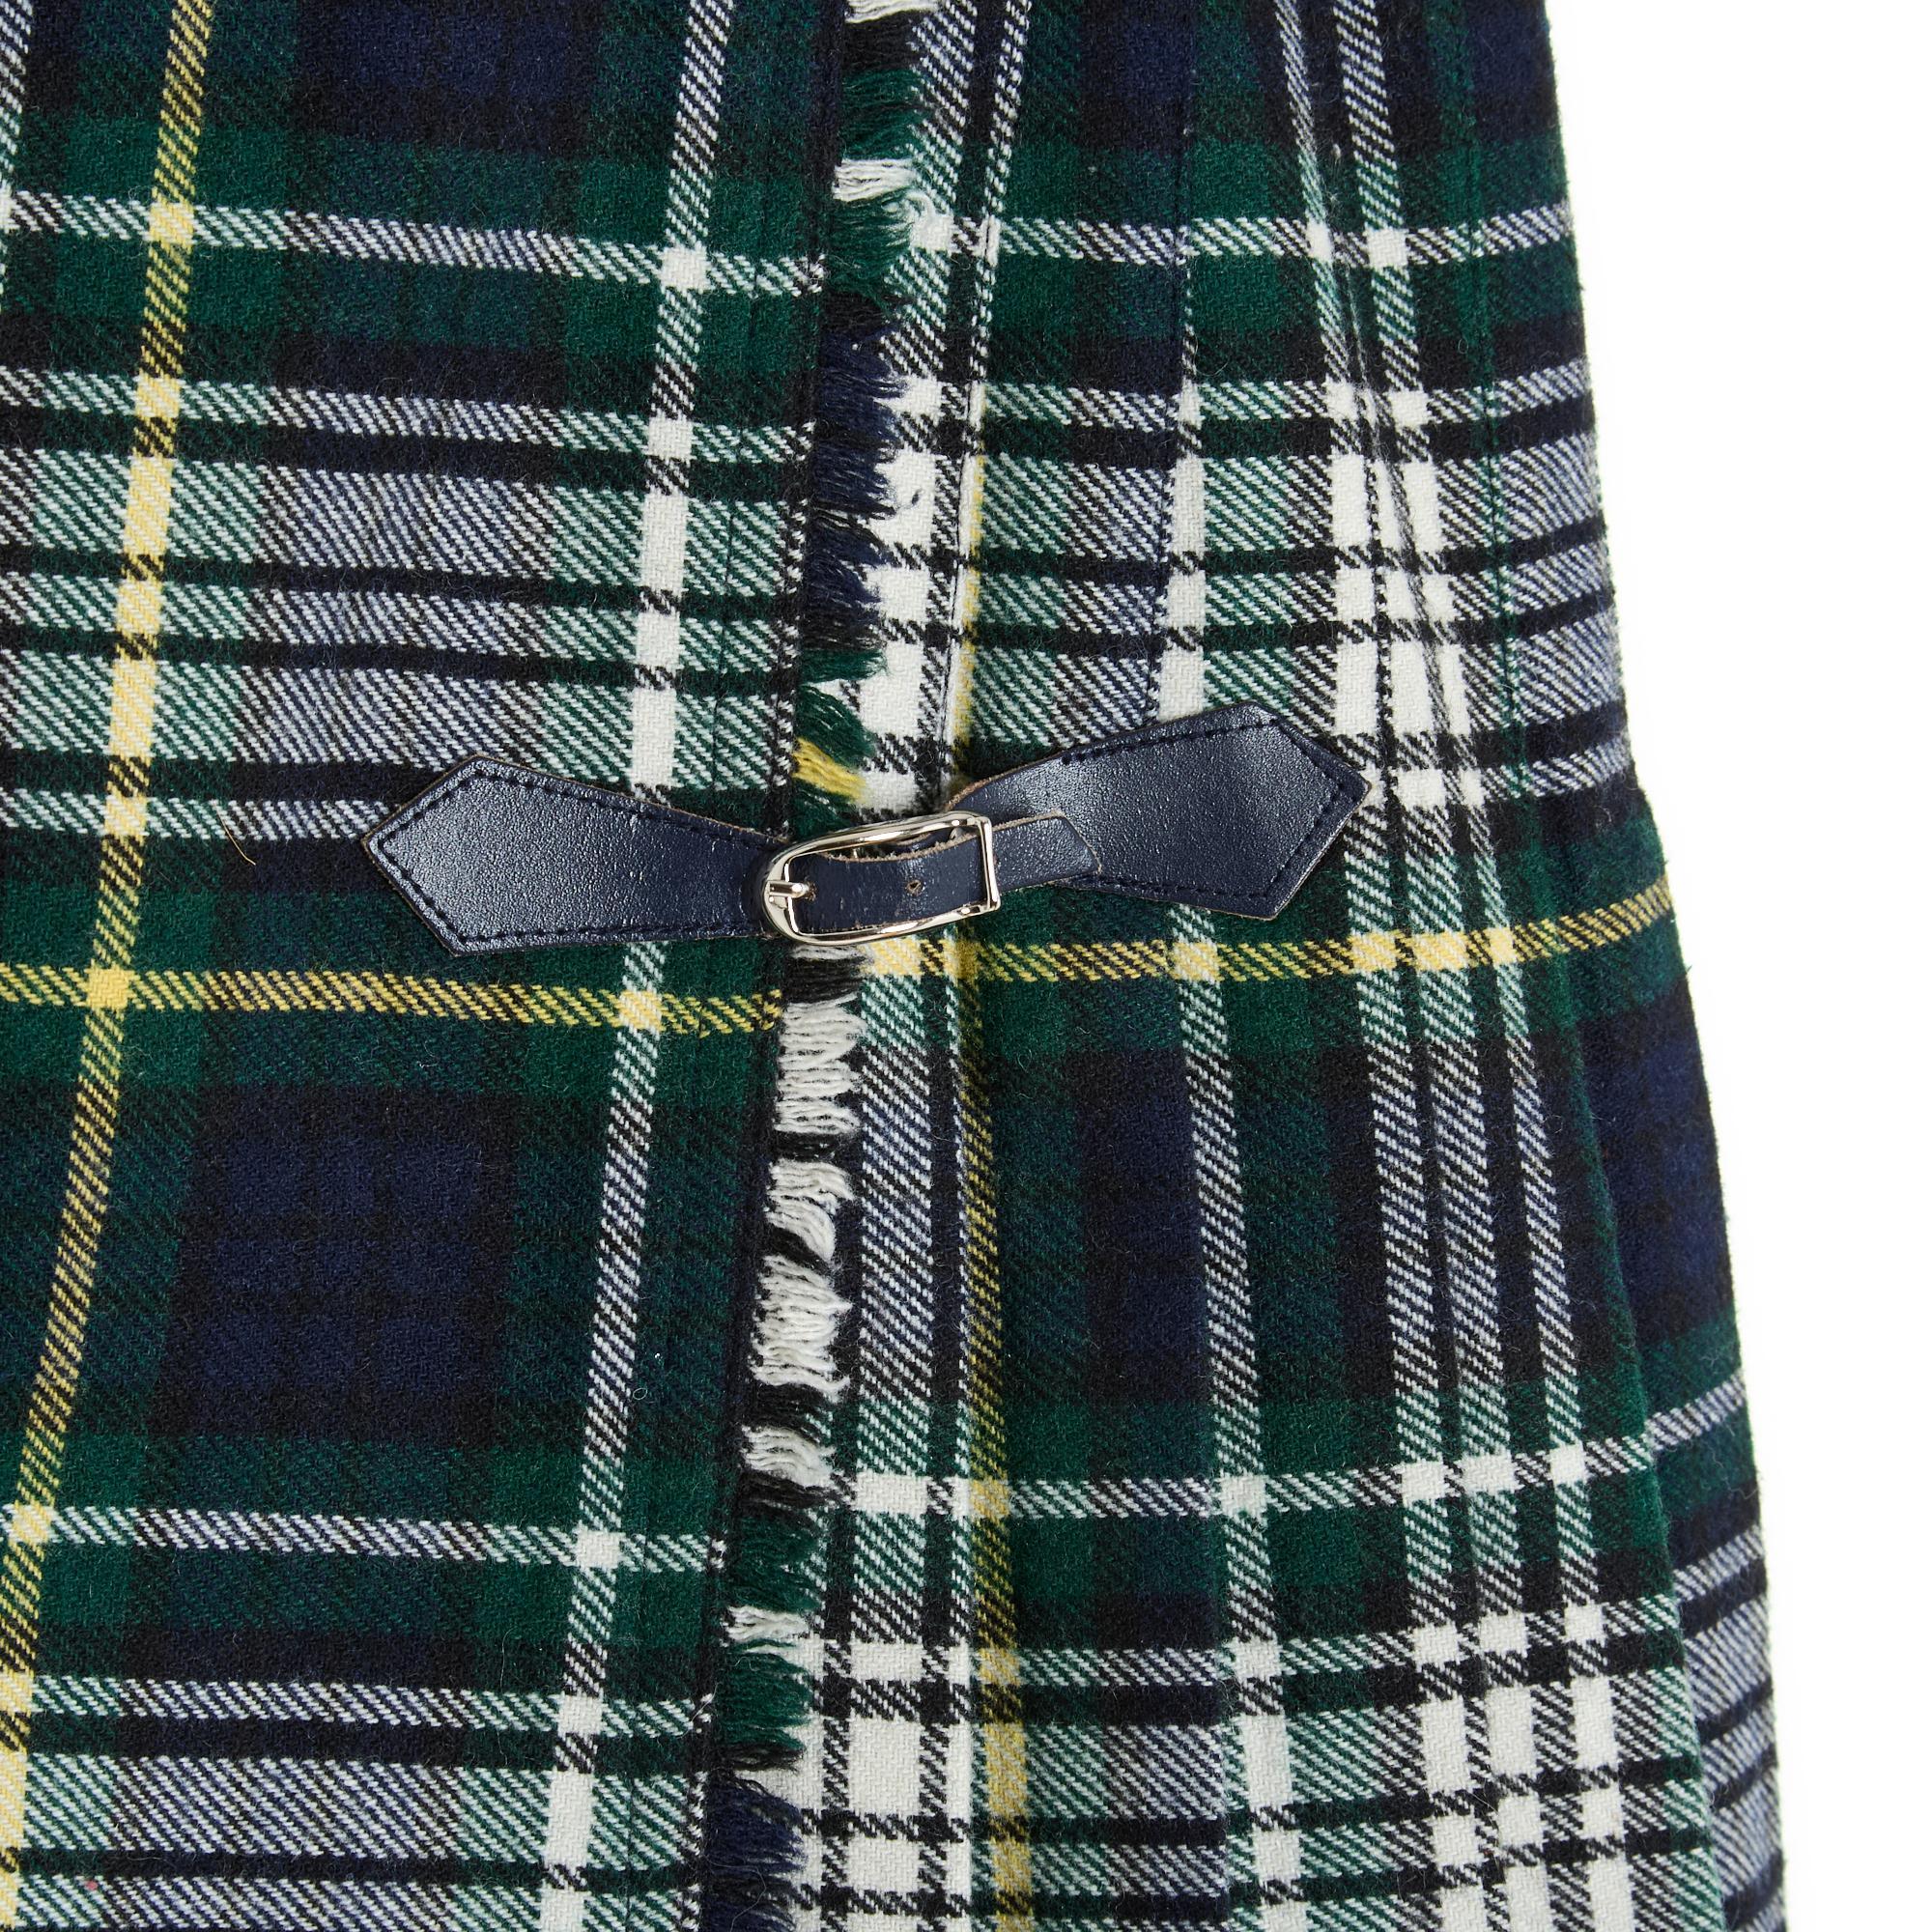 Short, pleated kilt-style wrap skirt in wool blend with tartan or check pattern, in shades of navy blue, green and ecru. Waist closed with a button on one side and two navy blue leather tabs on a silver metal pin buckle, unlined. No more size label